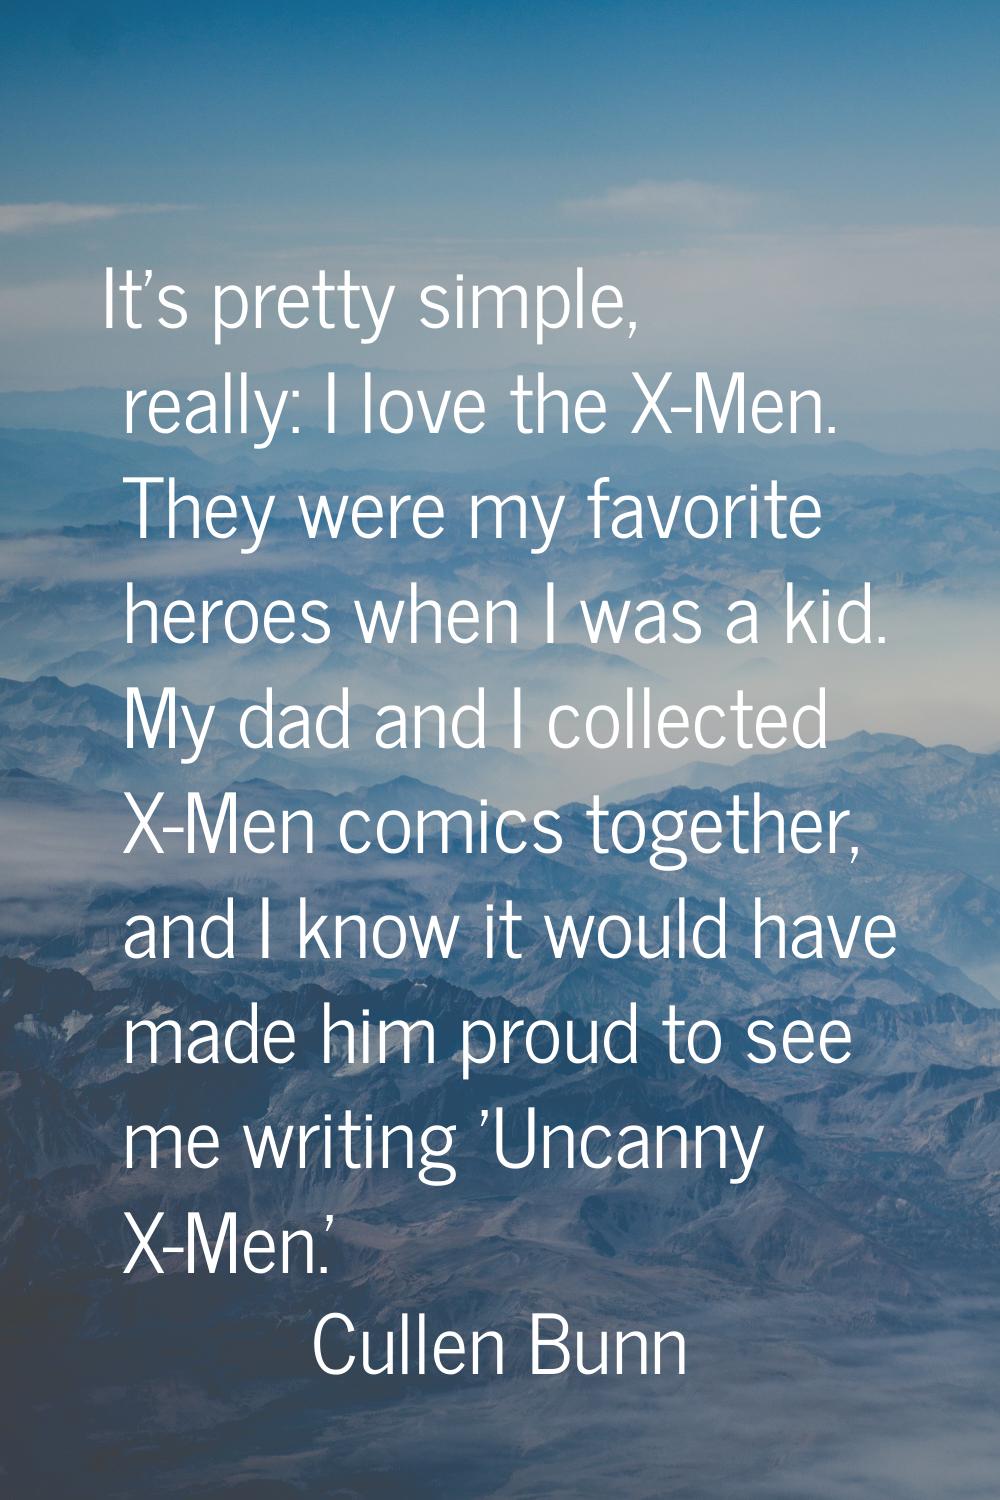 It's pretty simple, really: I love the X-Men. They were my favorite heroes when I was a kid. My dad